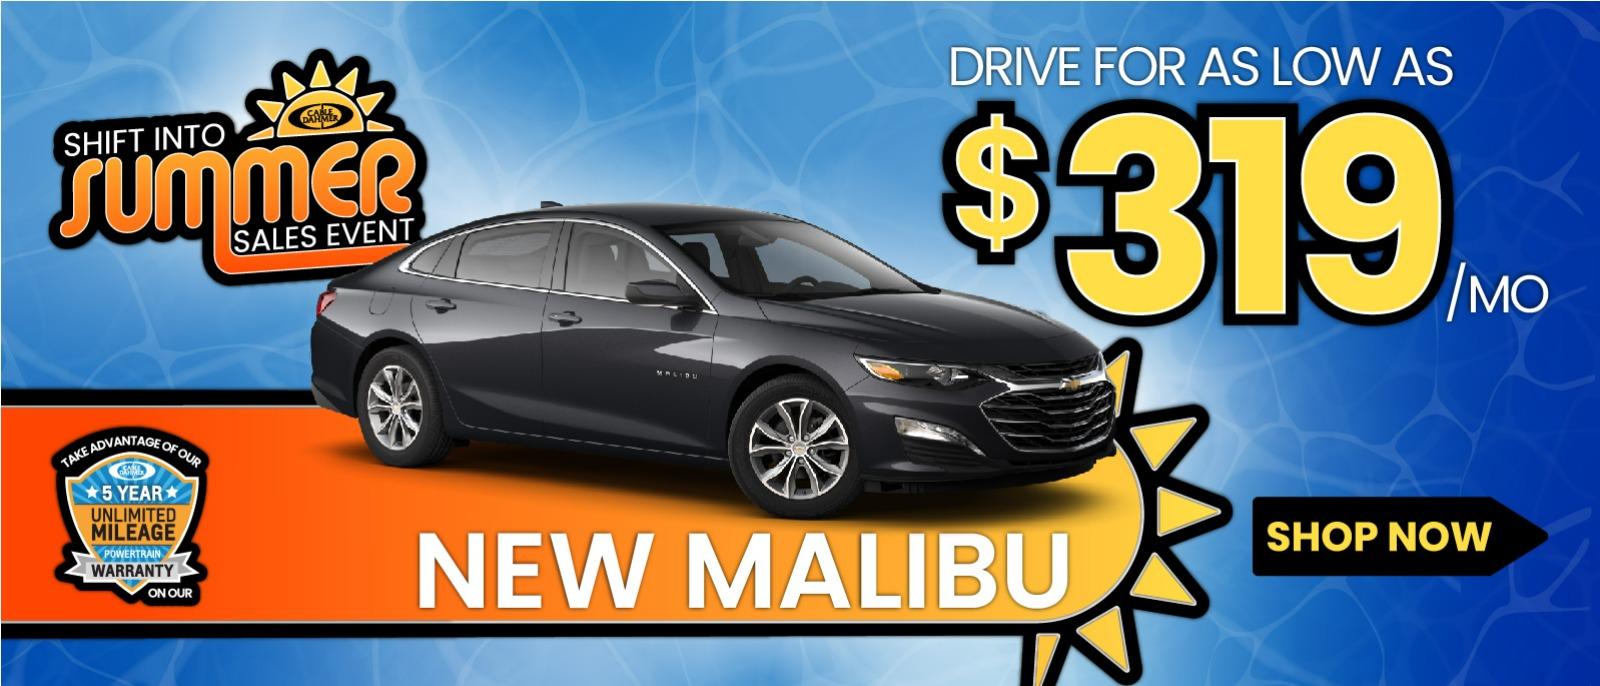 New Chevy Malibu for as little as $319 per month.